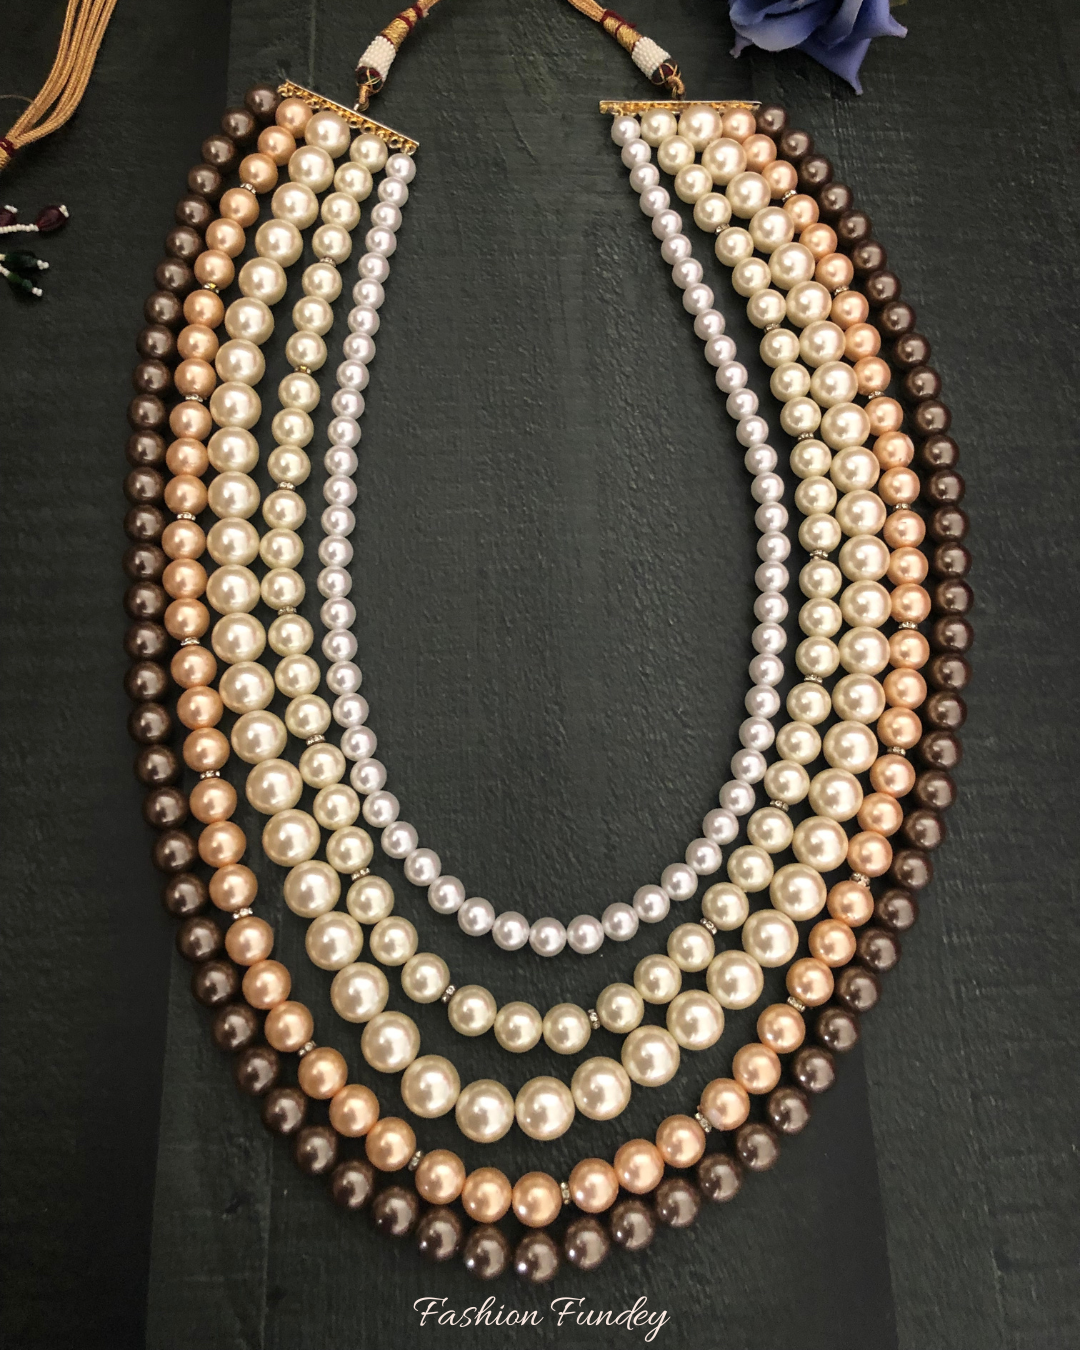 Ulfaat 5-Layered Pearl Necklace